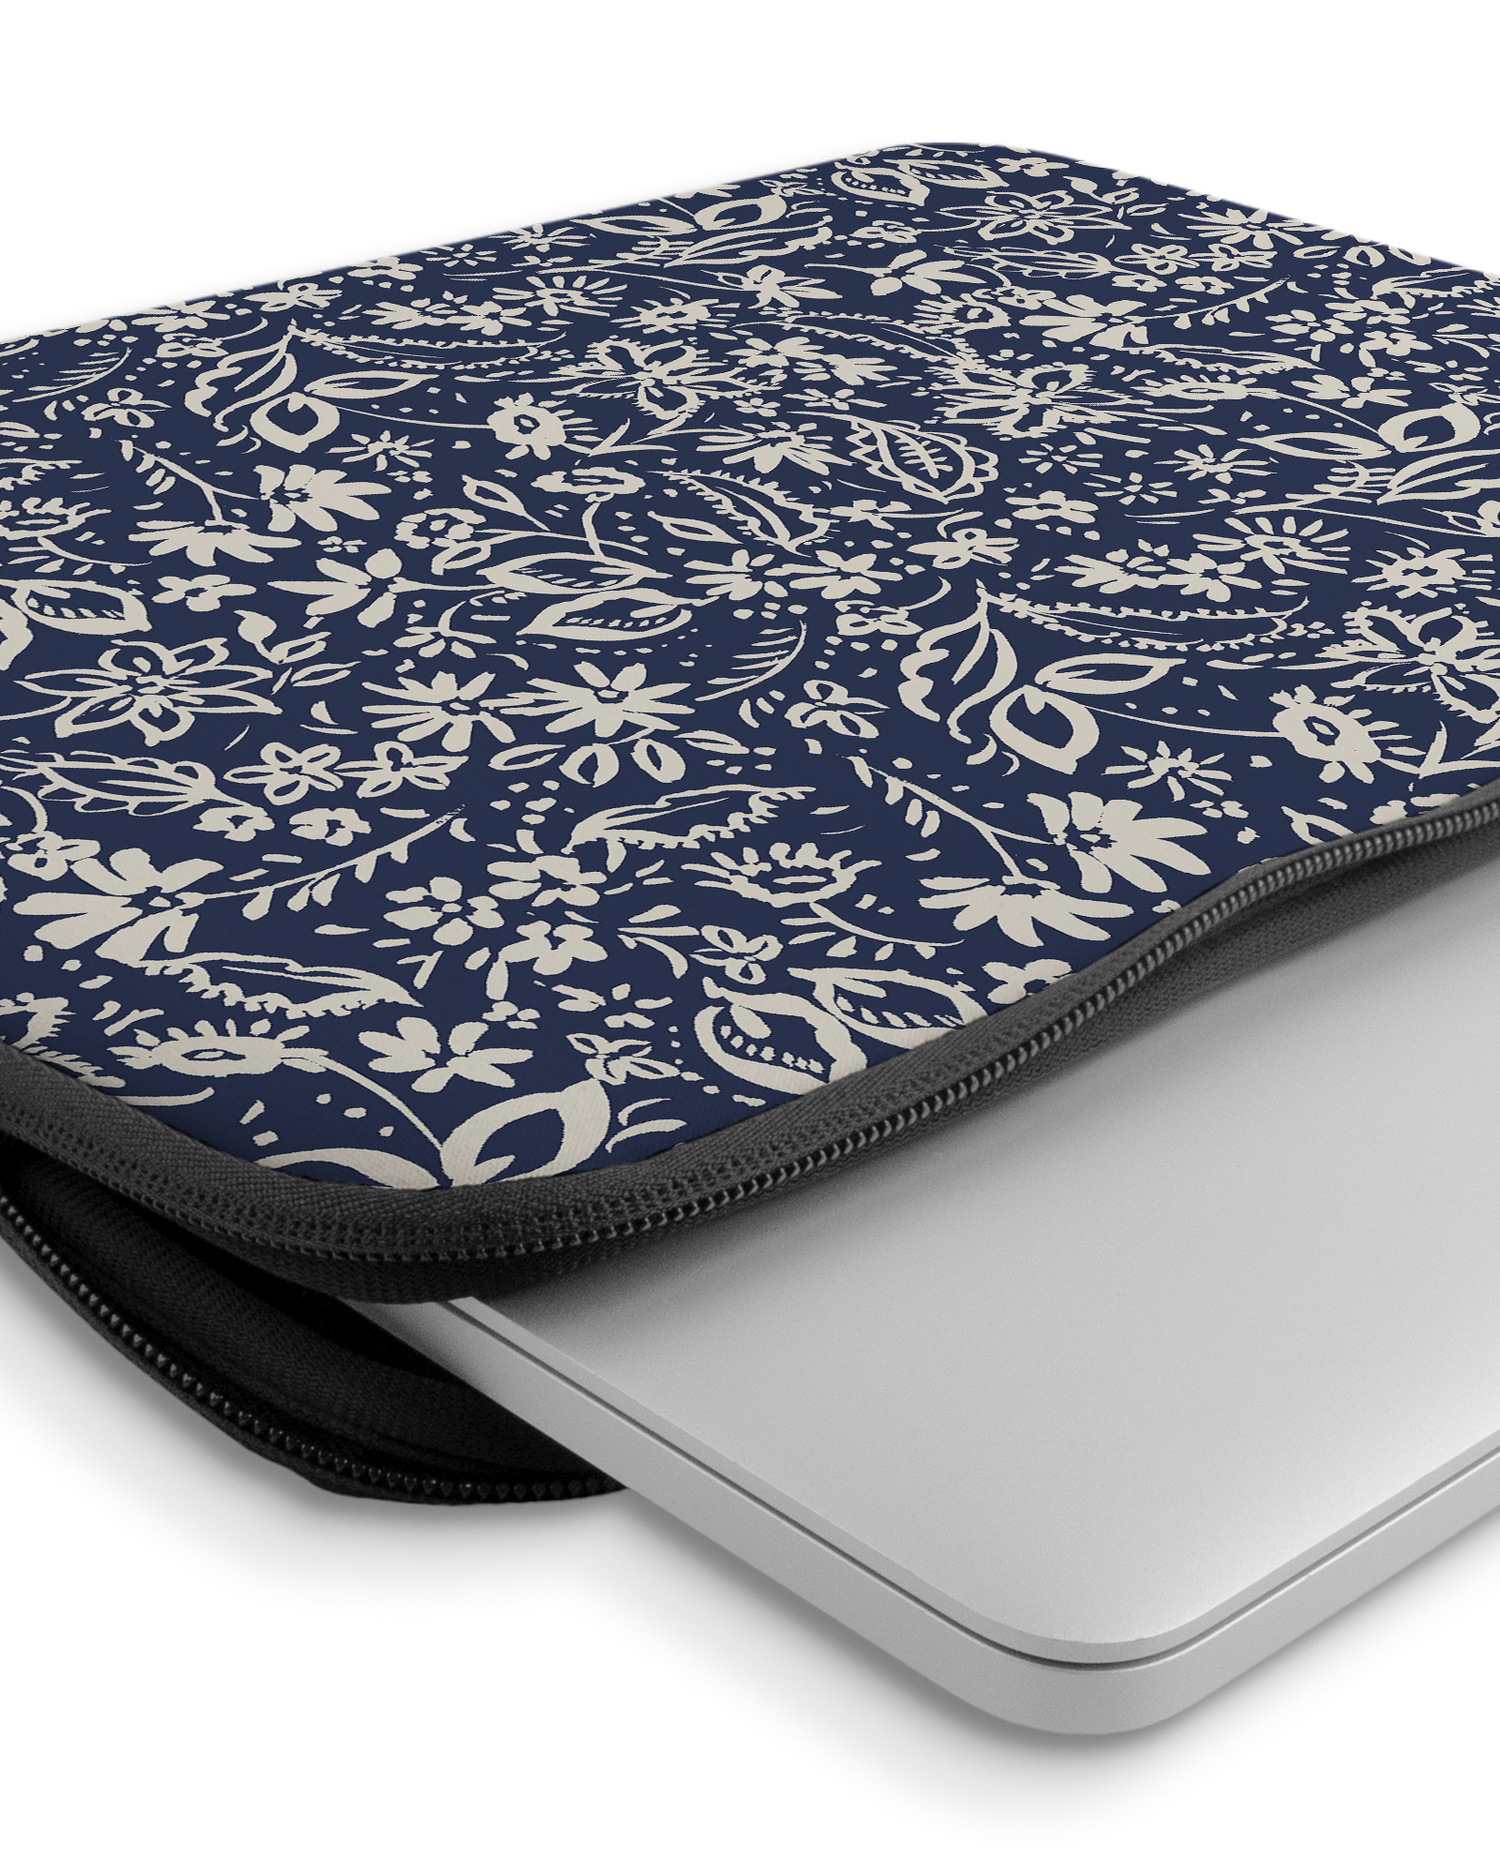 Ditsy Blue Paisley Laptop Case 14-15 inch with device inside